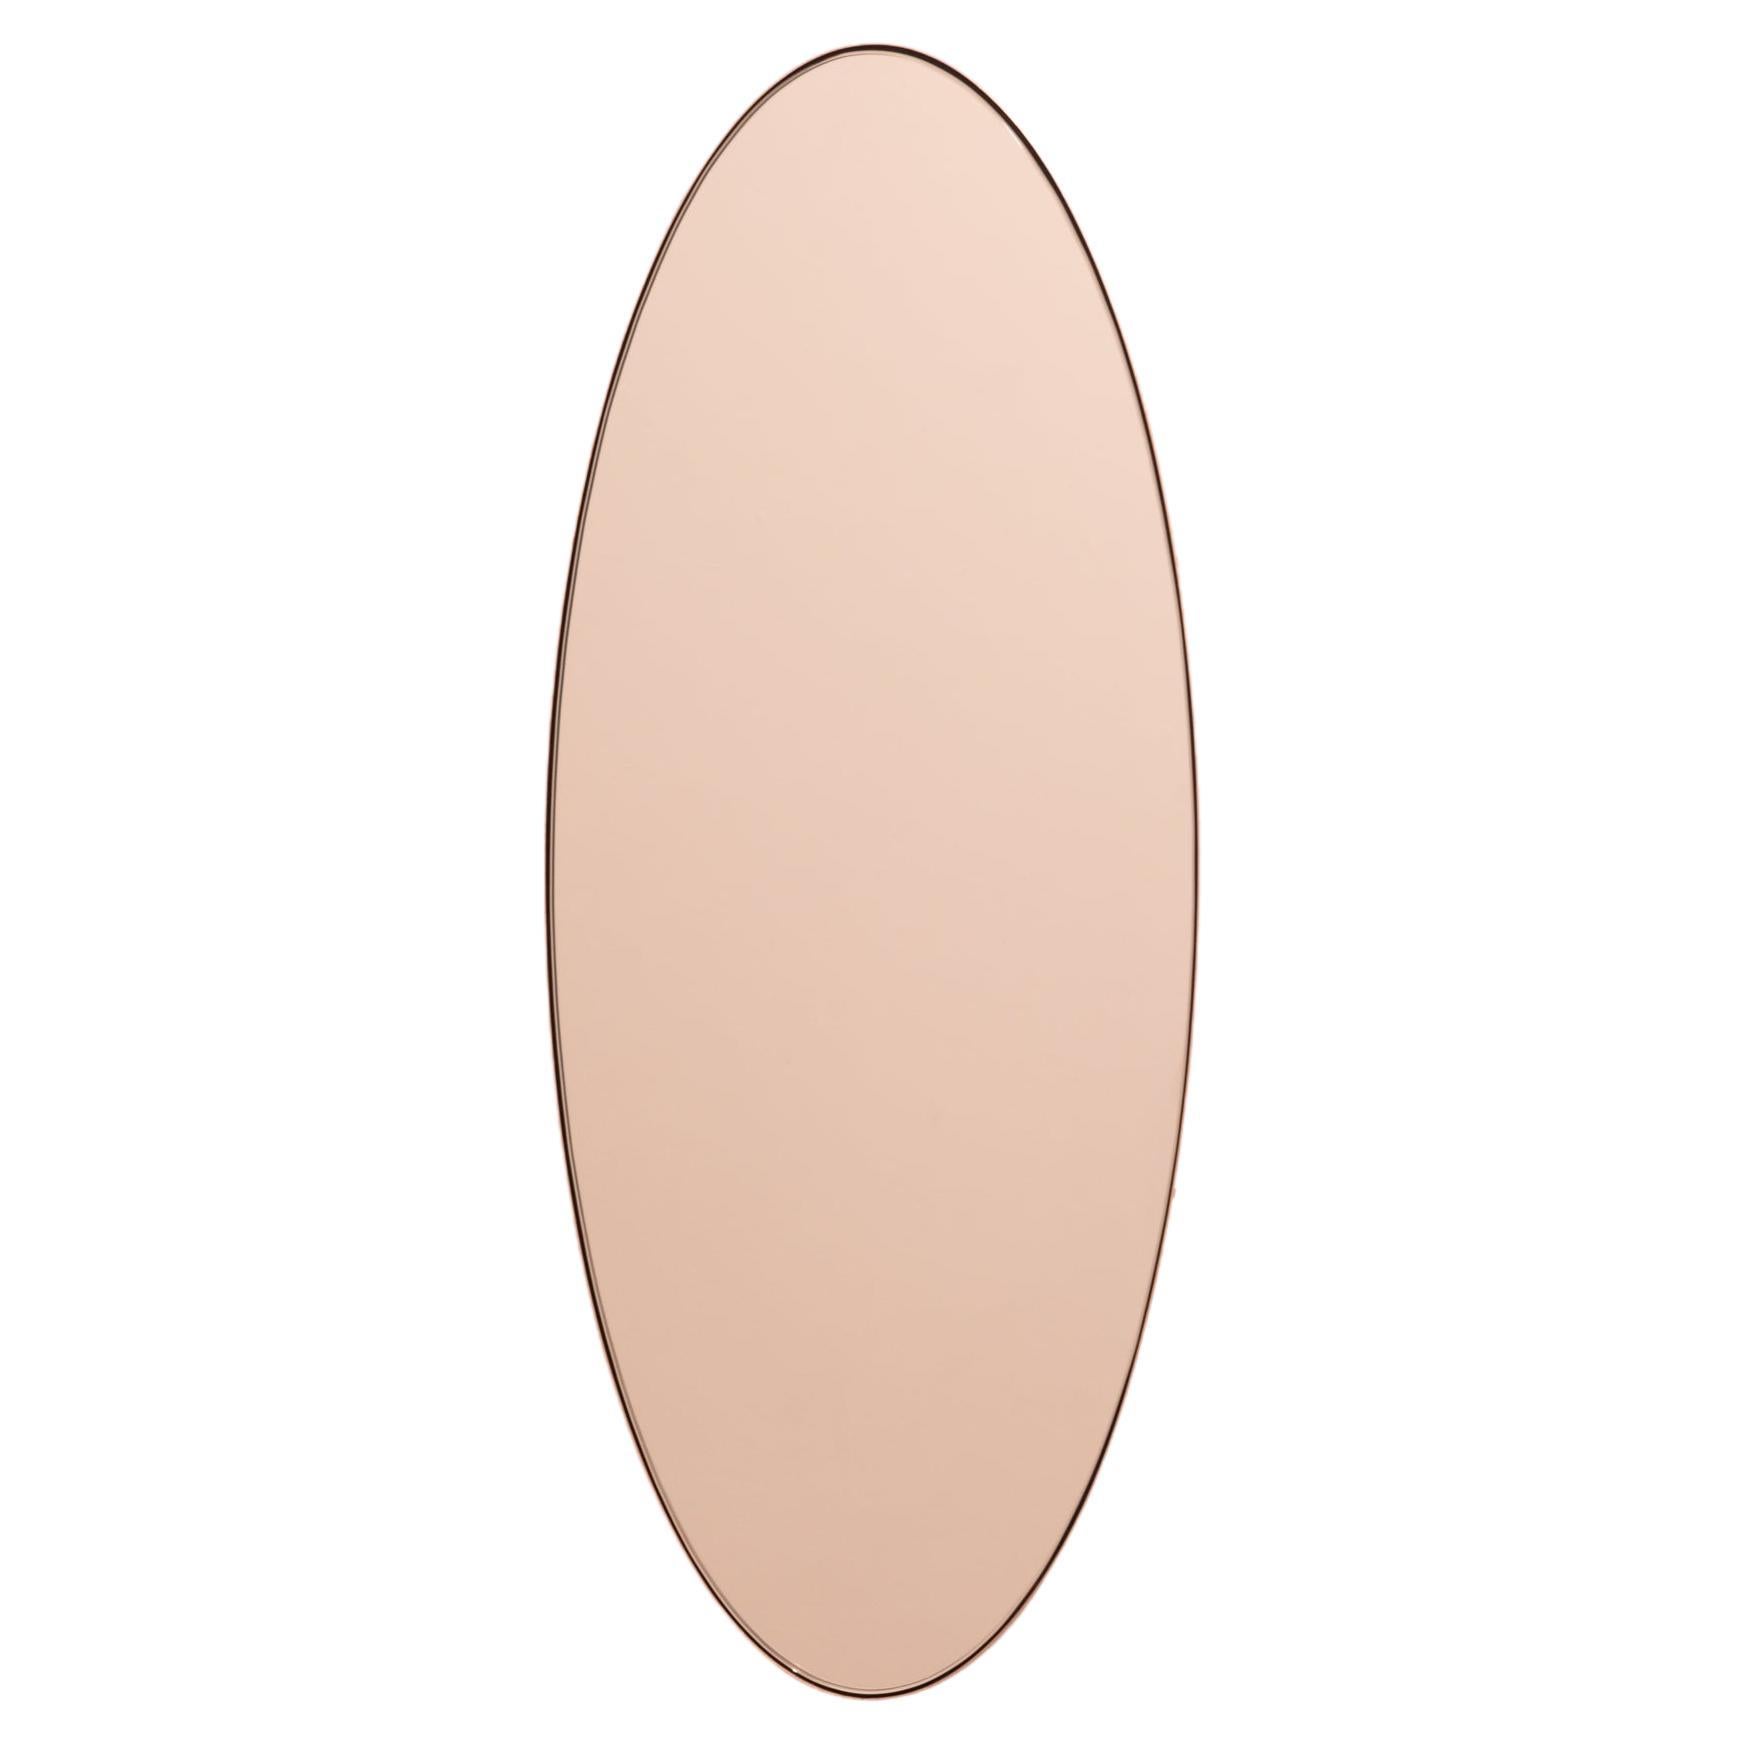 Ovalis Oval shaped Modern Rose Gold Mirror with a Copper Frame, XL